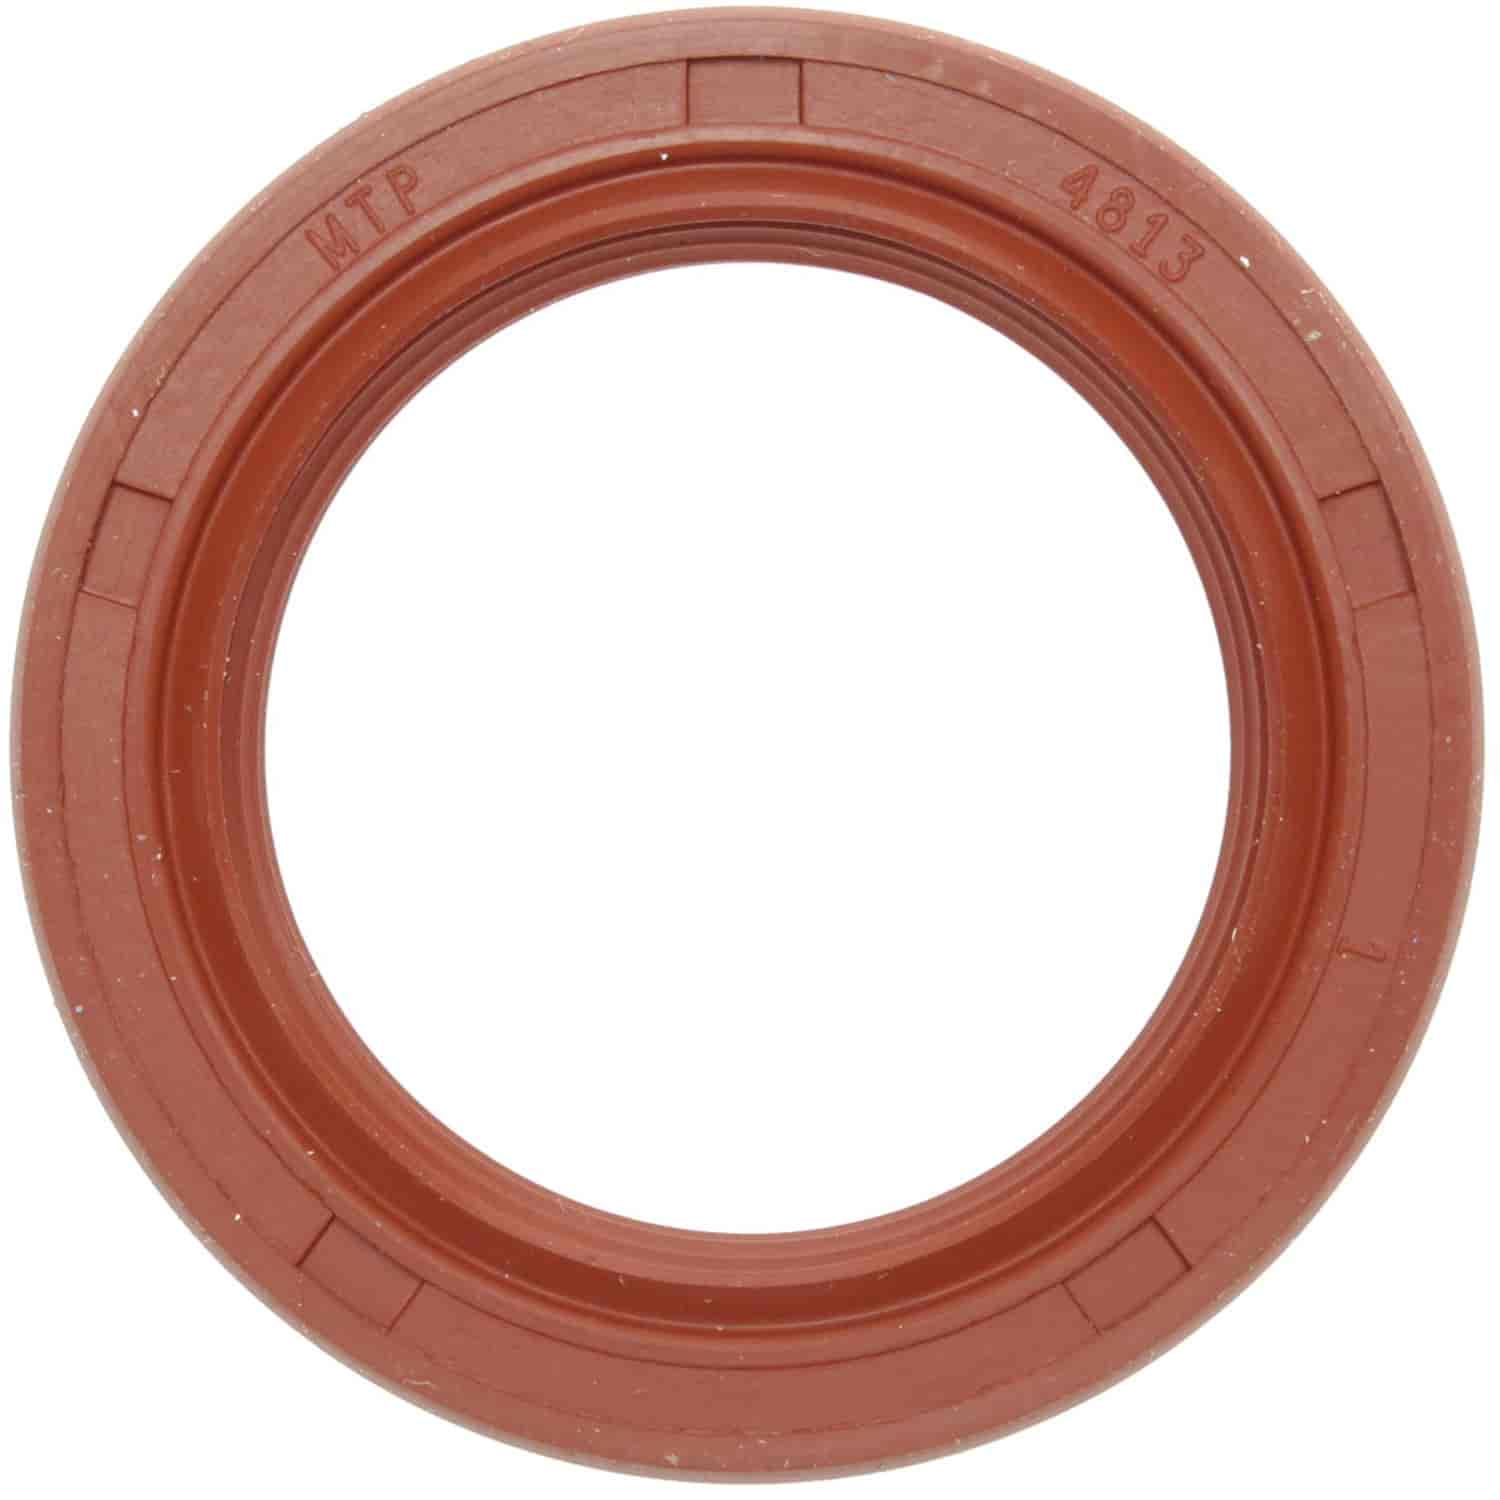 Camshaft Seal Datsun for Nissan Stanza w/CA20S 82-85